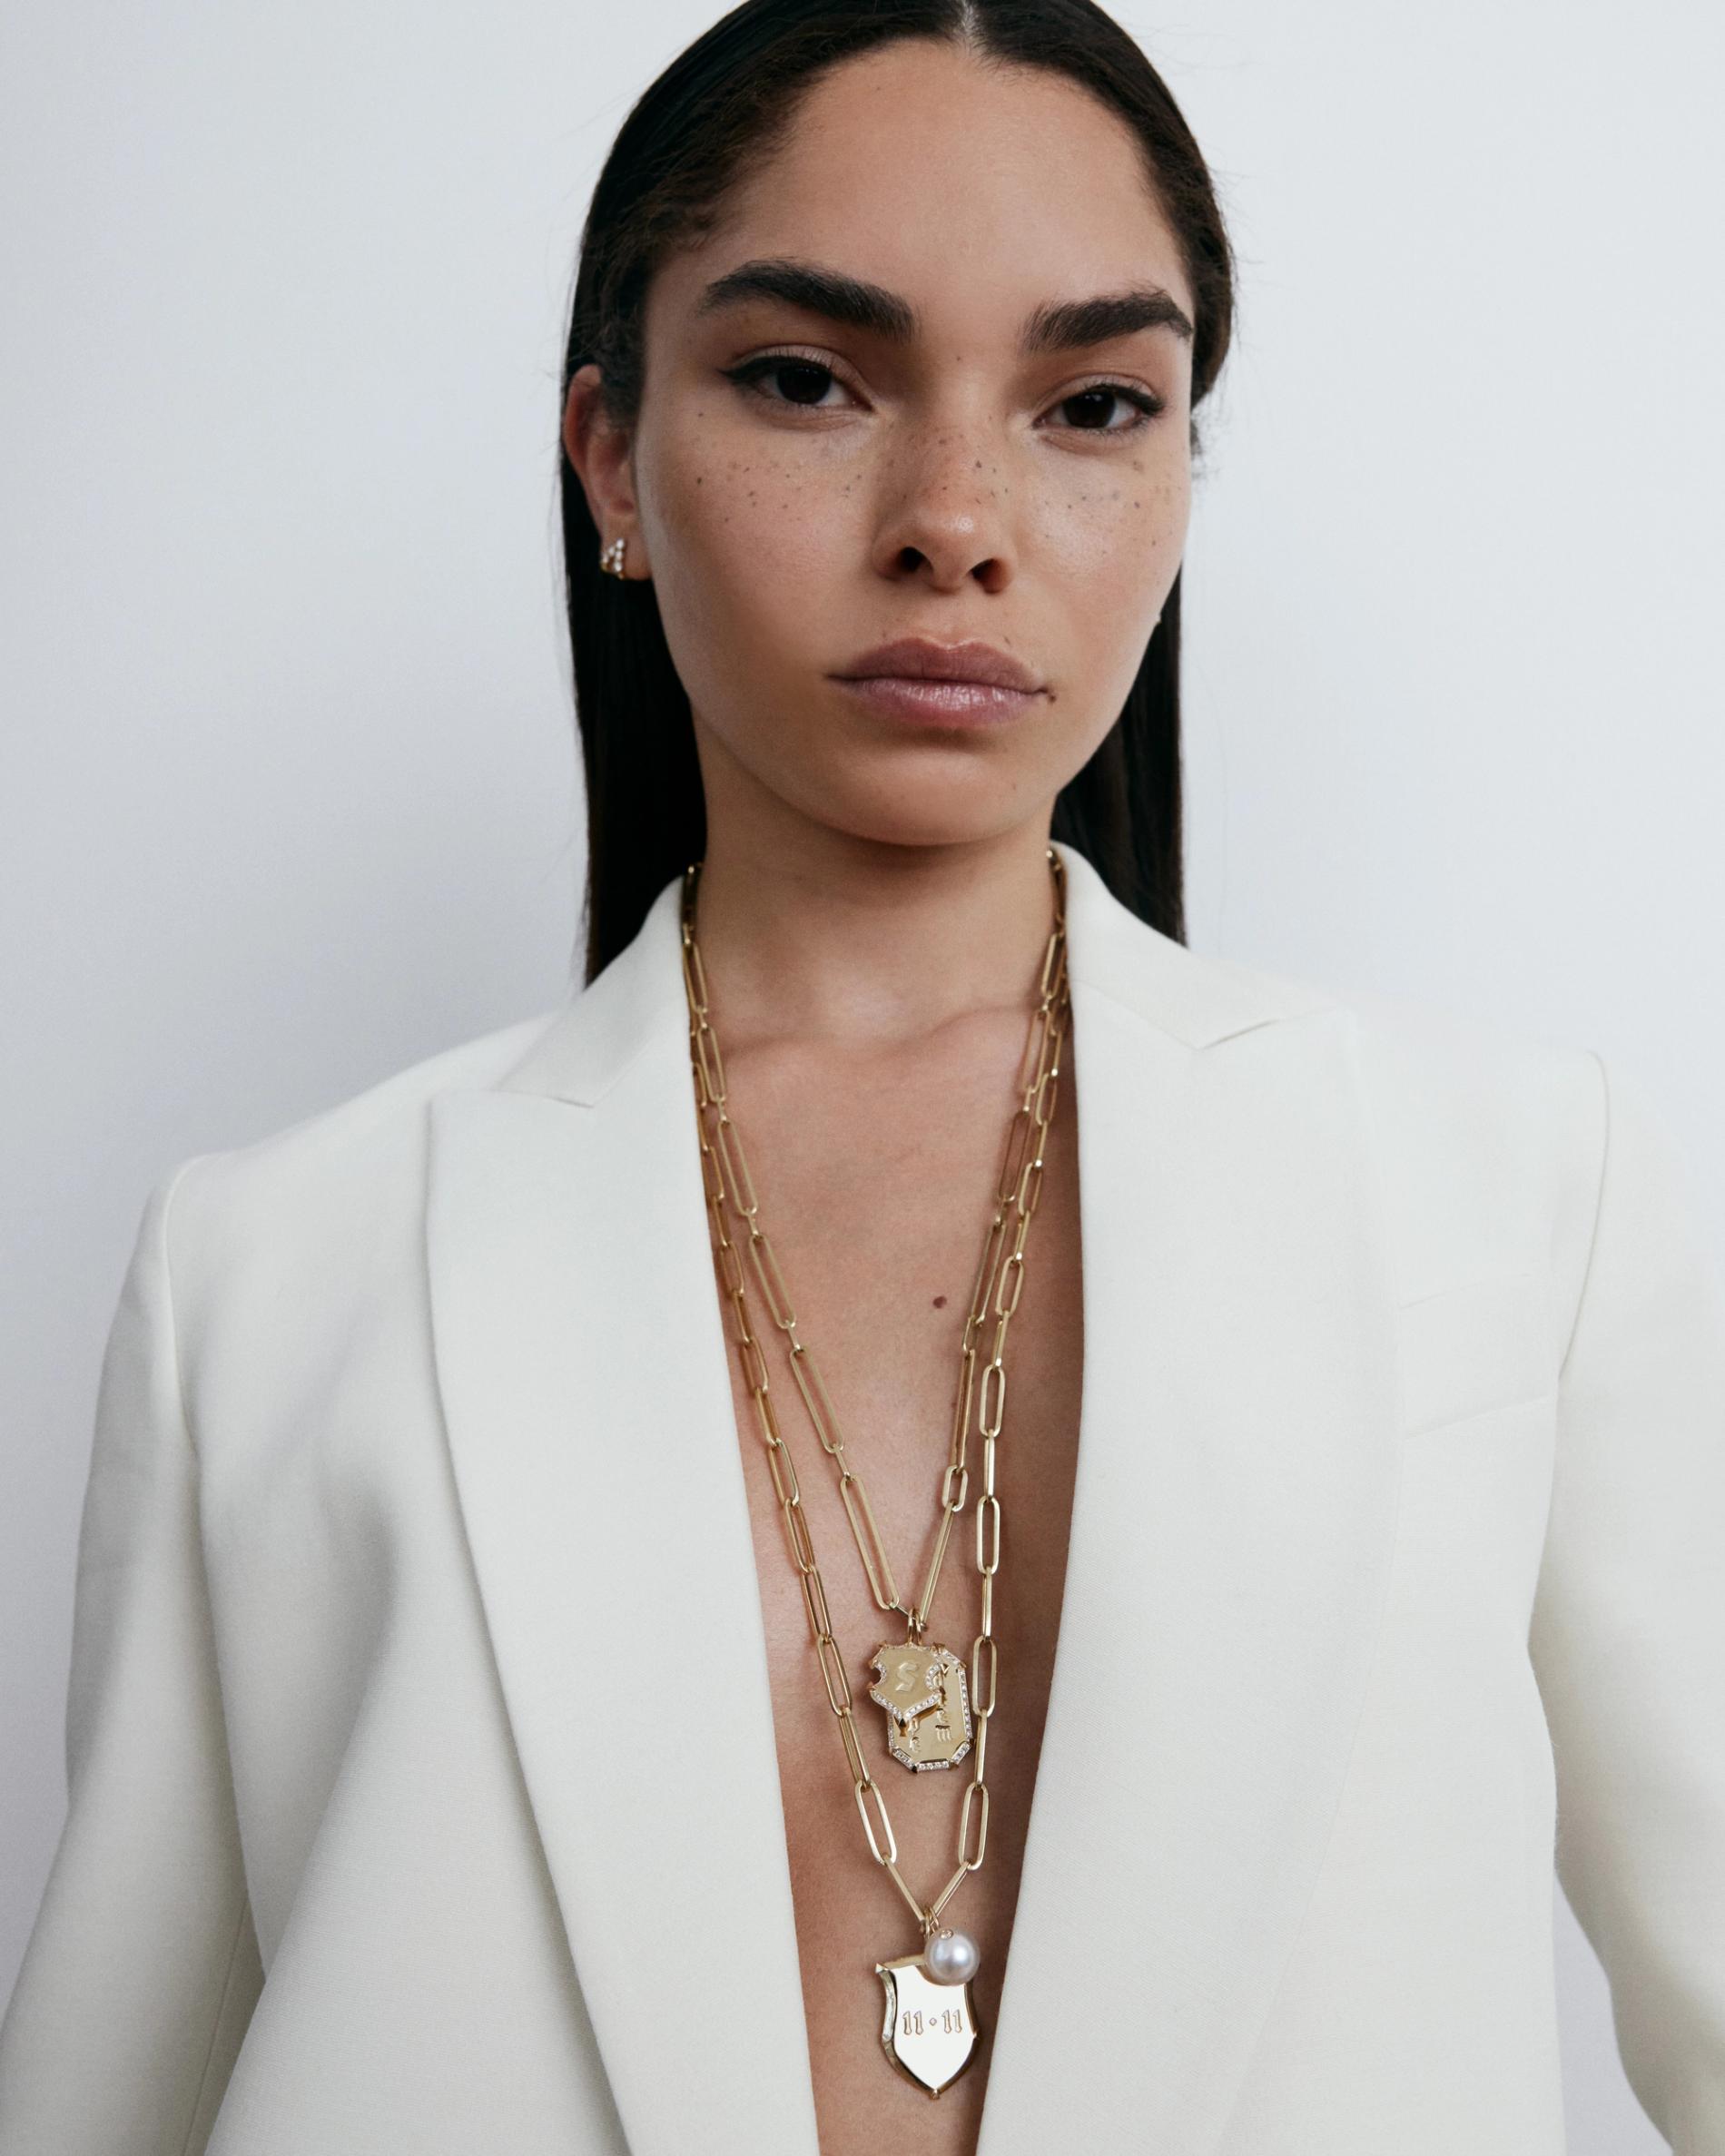 Model with slicked back hair wearing multiple gold chains and assorted charms under white blazer looking directly into camera. 